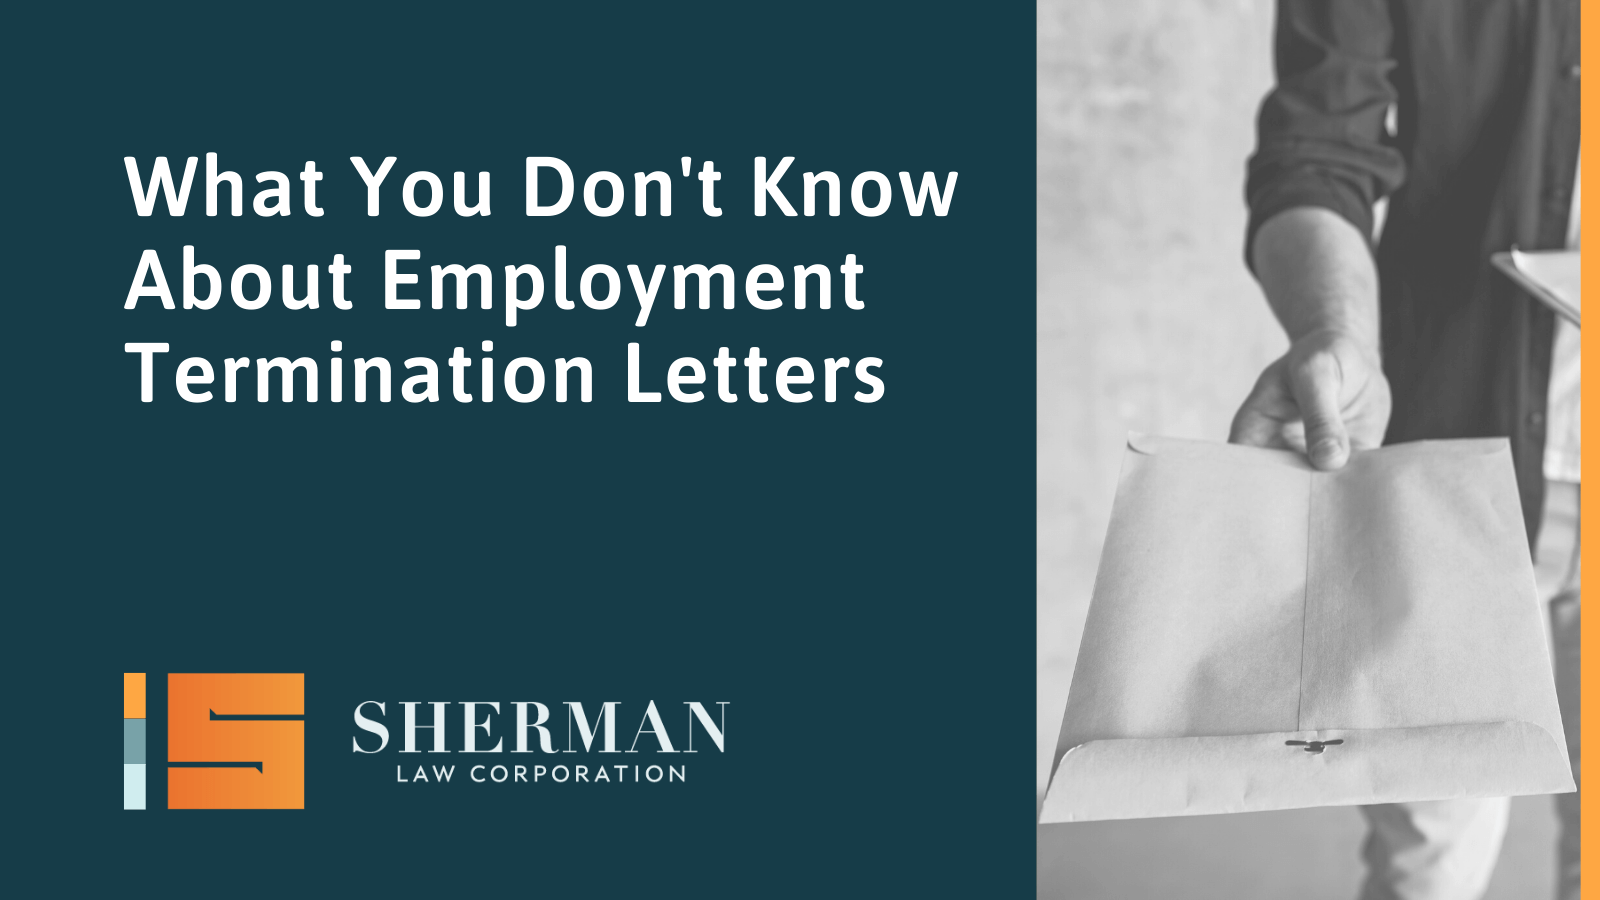 What You Don't Know About Employment Termination Letters- california employment lawyer - sherman law corporation